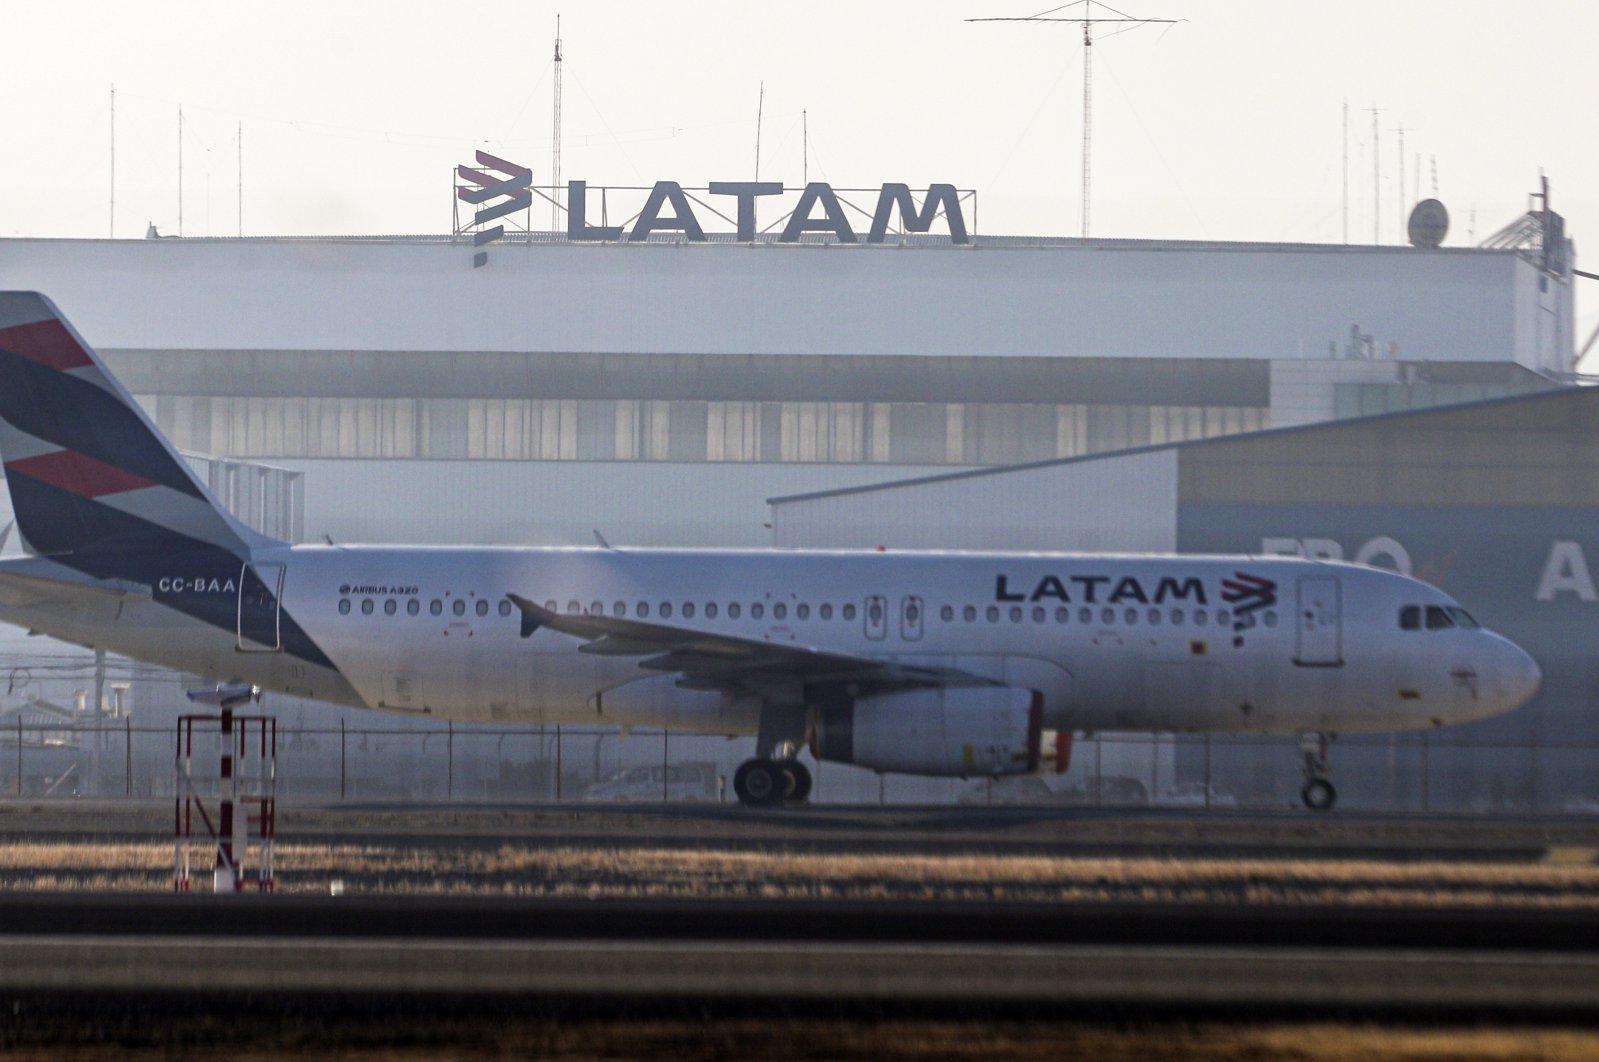 A Latam airplane sits parked at the Arturo Merino Benitez airport in Santiago, Chile, Tuesday, May 26, 2020. (AP Photo)